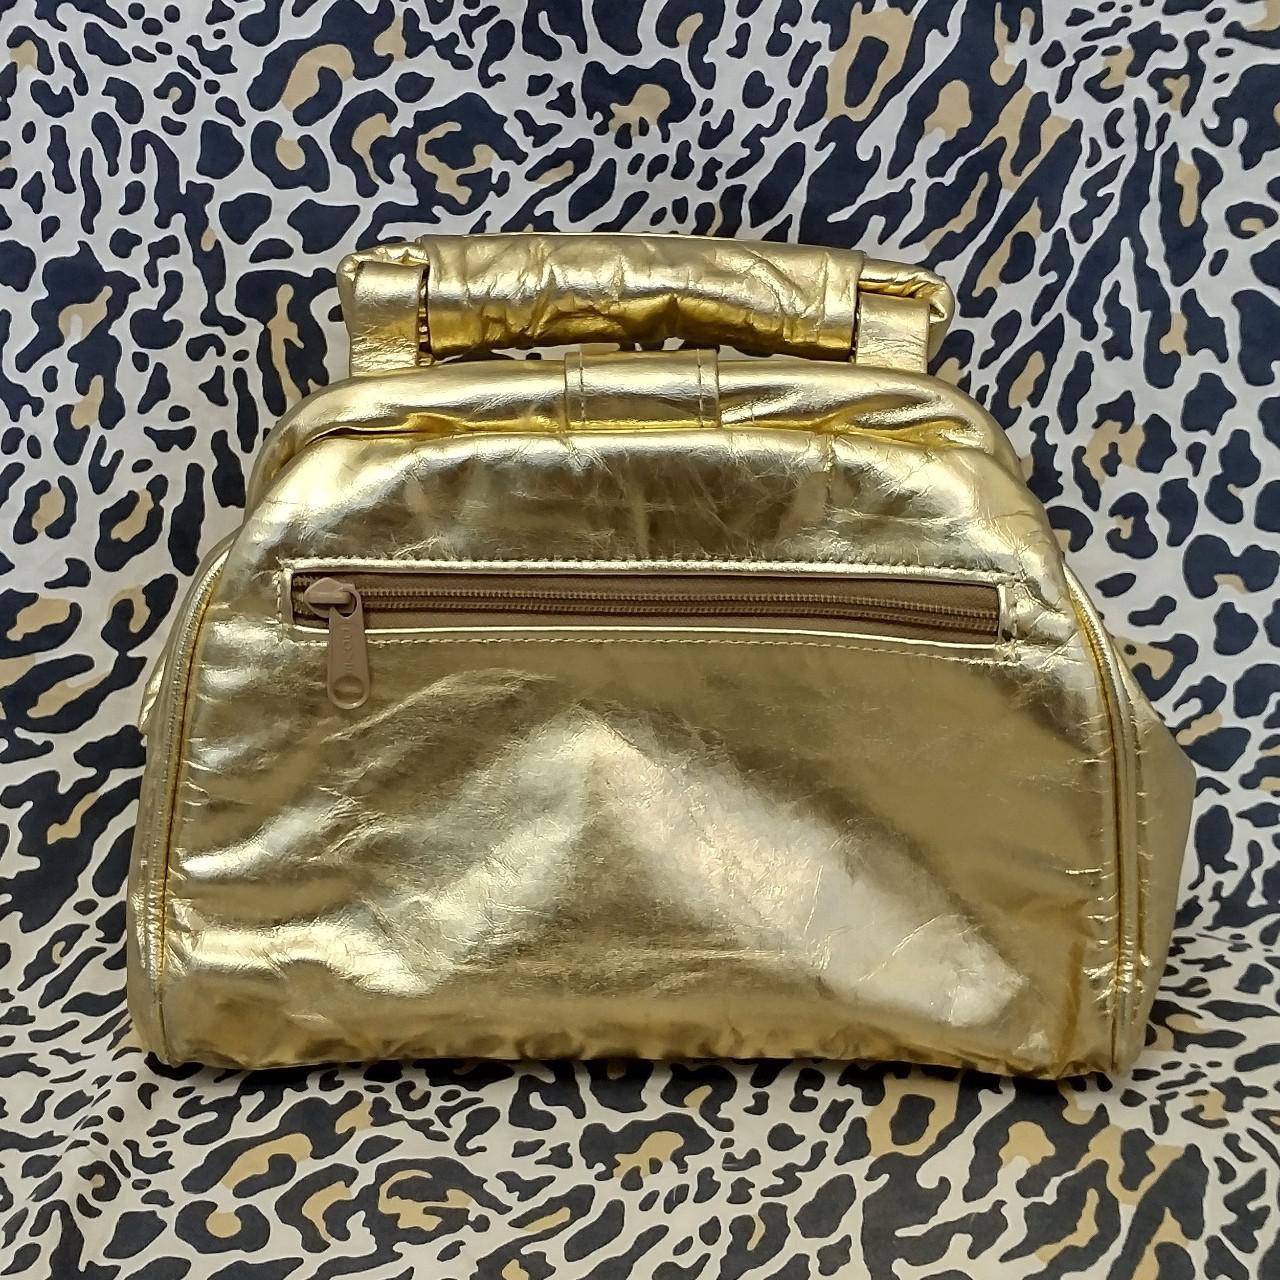 American Vintage Women's Gold and Silver Bag (2)